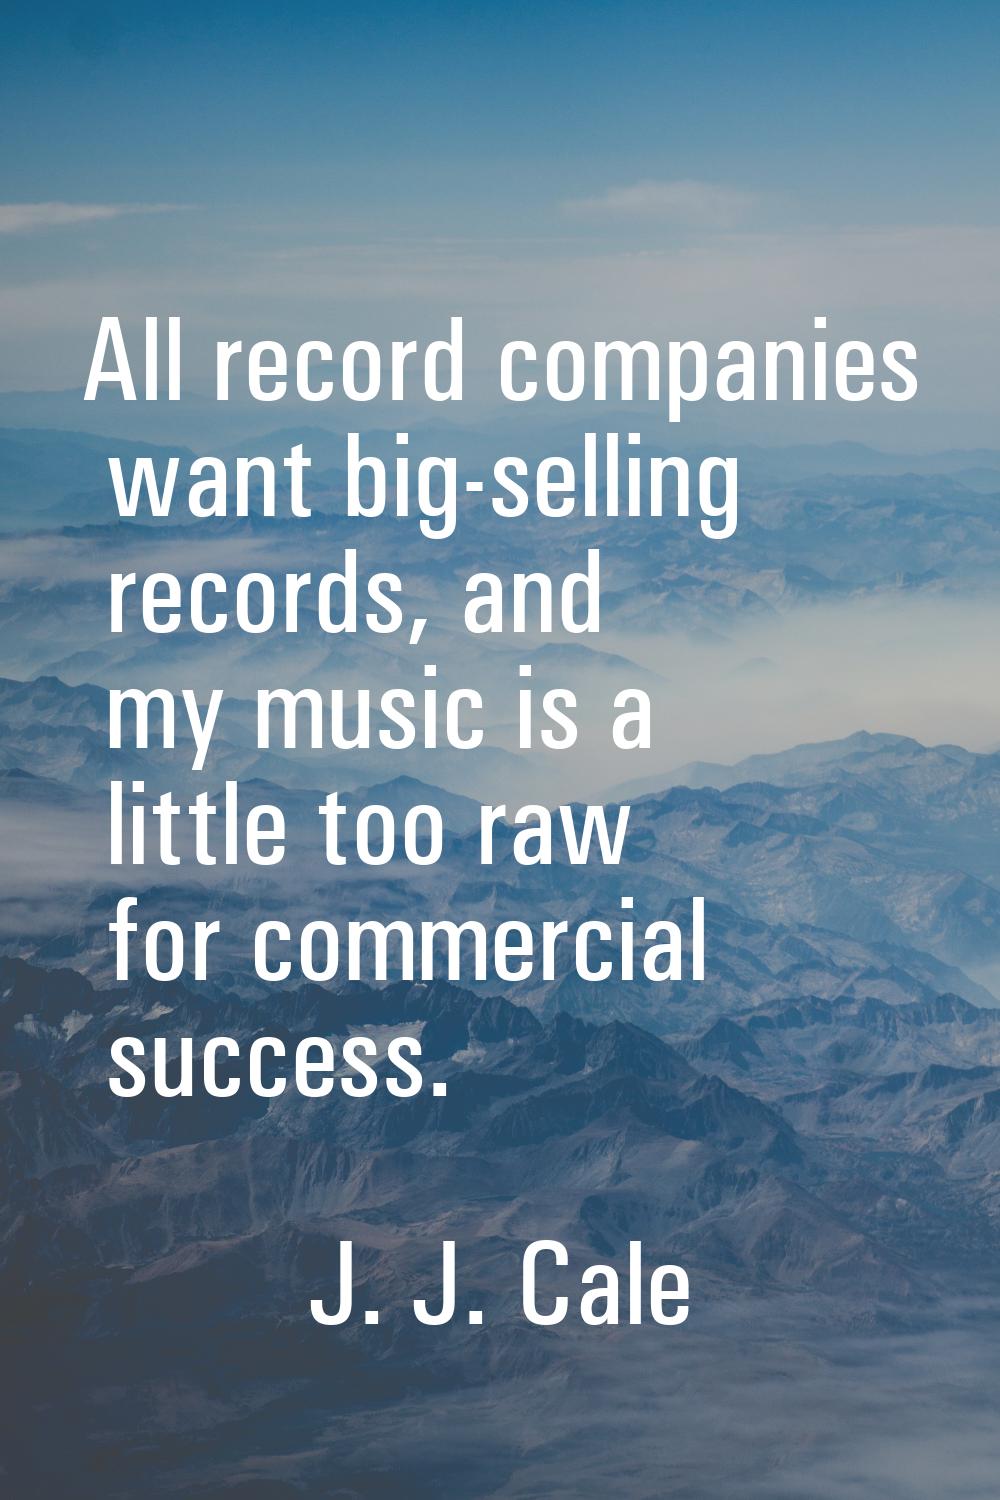 All record companies want big-selling records, and my music is a little too raw for commercial succ